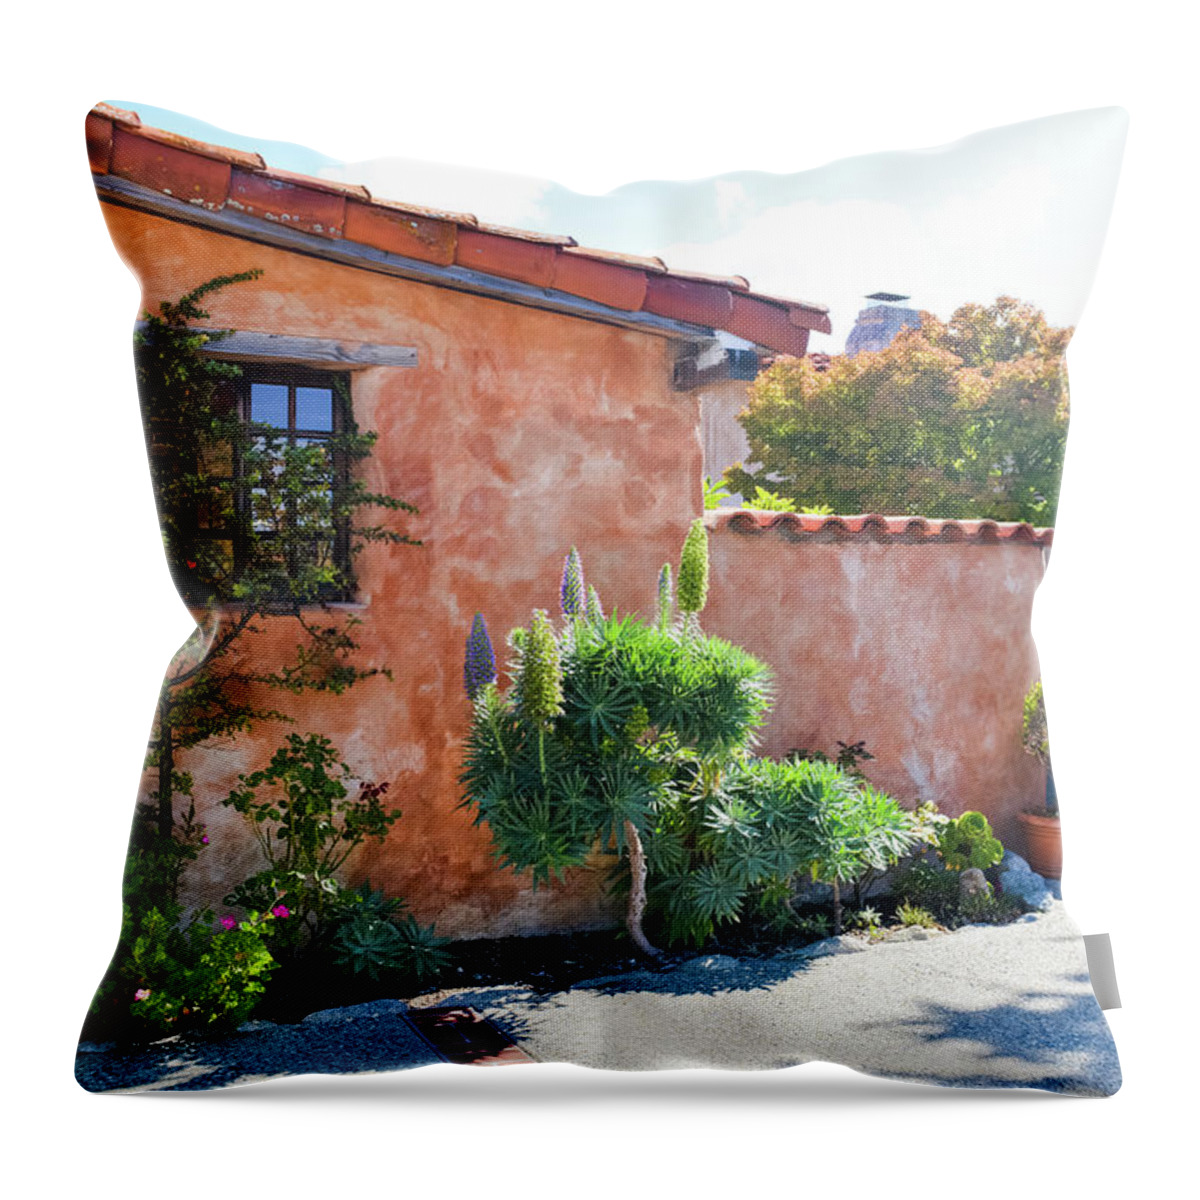 Carmel Mission Throw Pillow featuring the photograph Carmel Mission Garden by Kyle Hanson